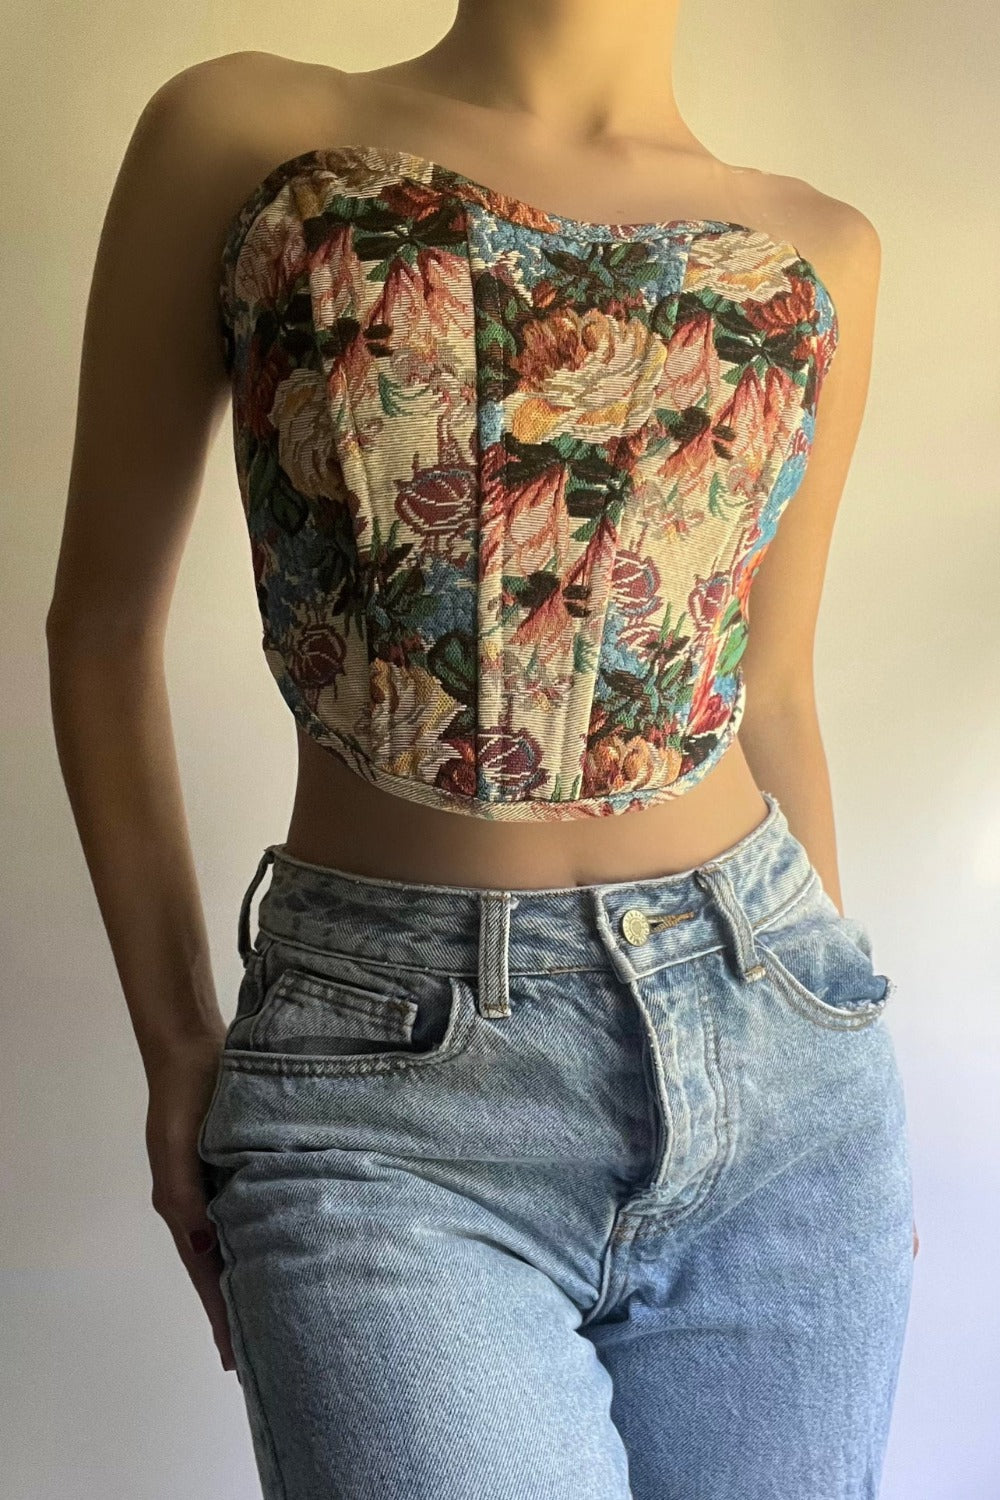 Floral Tapestry Corset Top in Pink